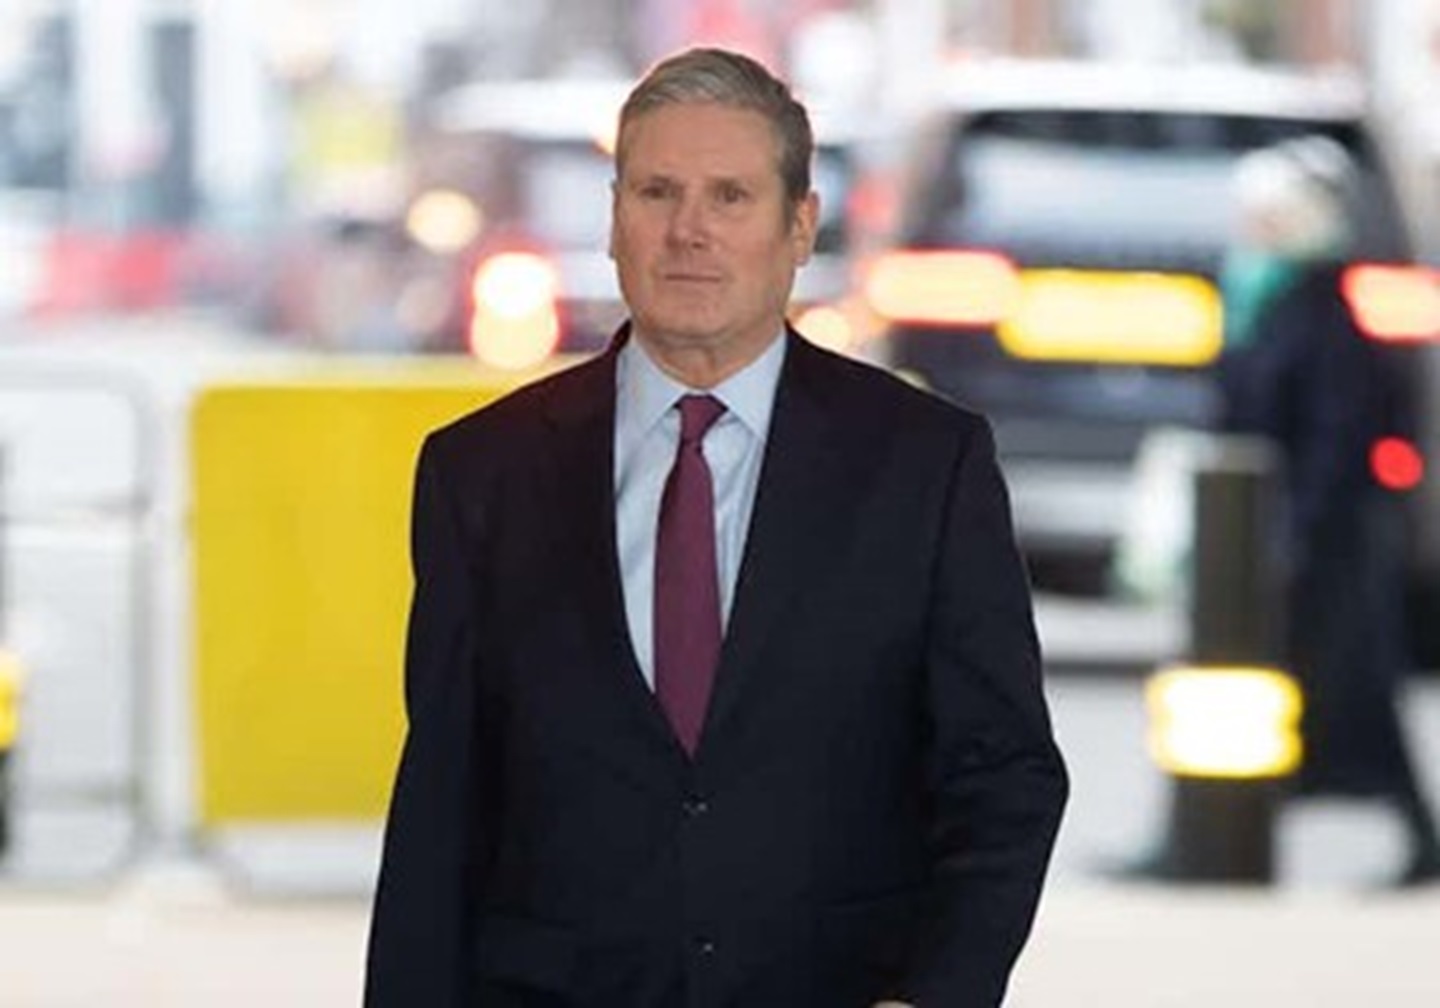 Policy briefings suggest Keir Starmer is keen for Britain to play a more proactive role in the pursuit of peace. Zuma Press Inc / Alamy Stock Photo